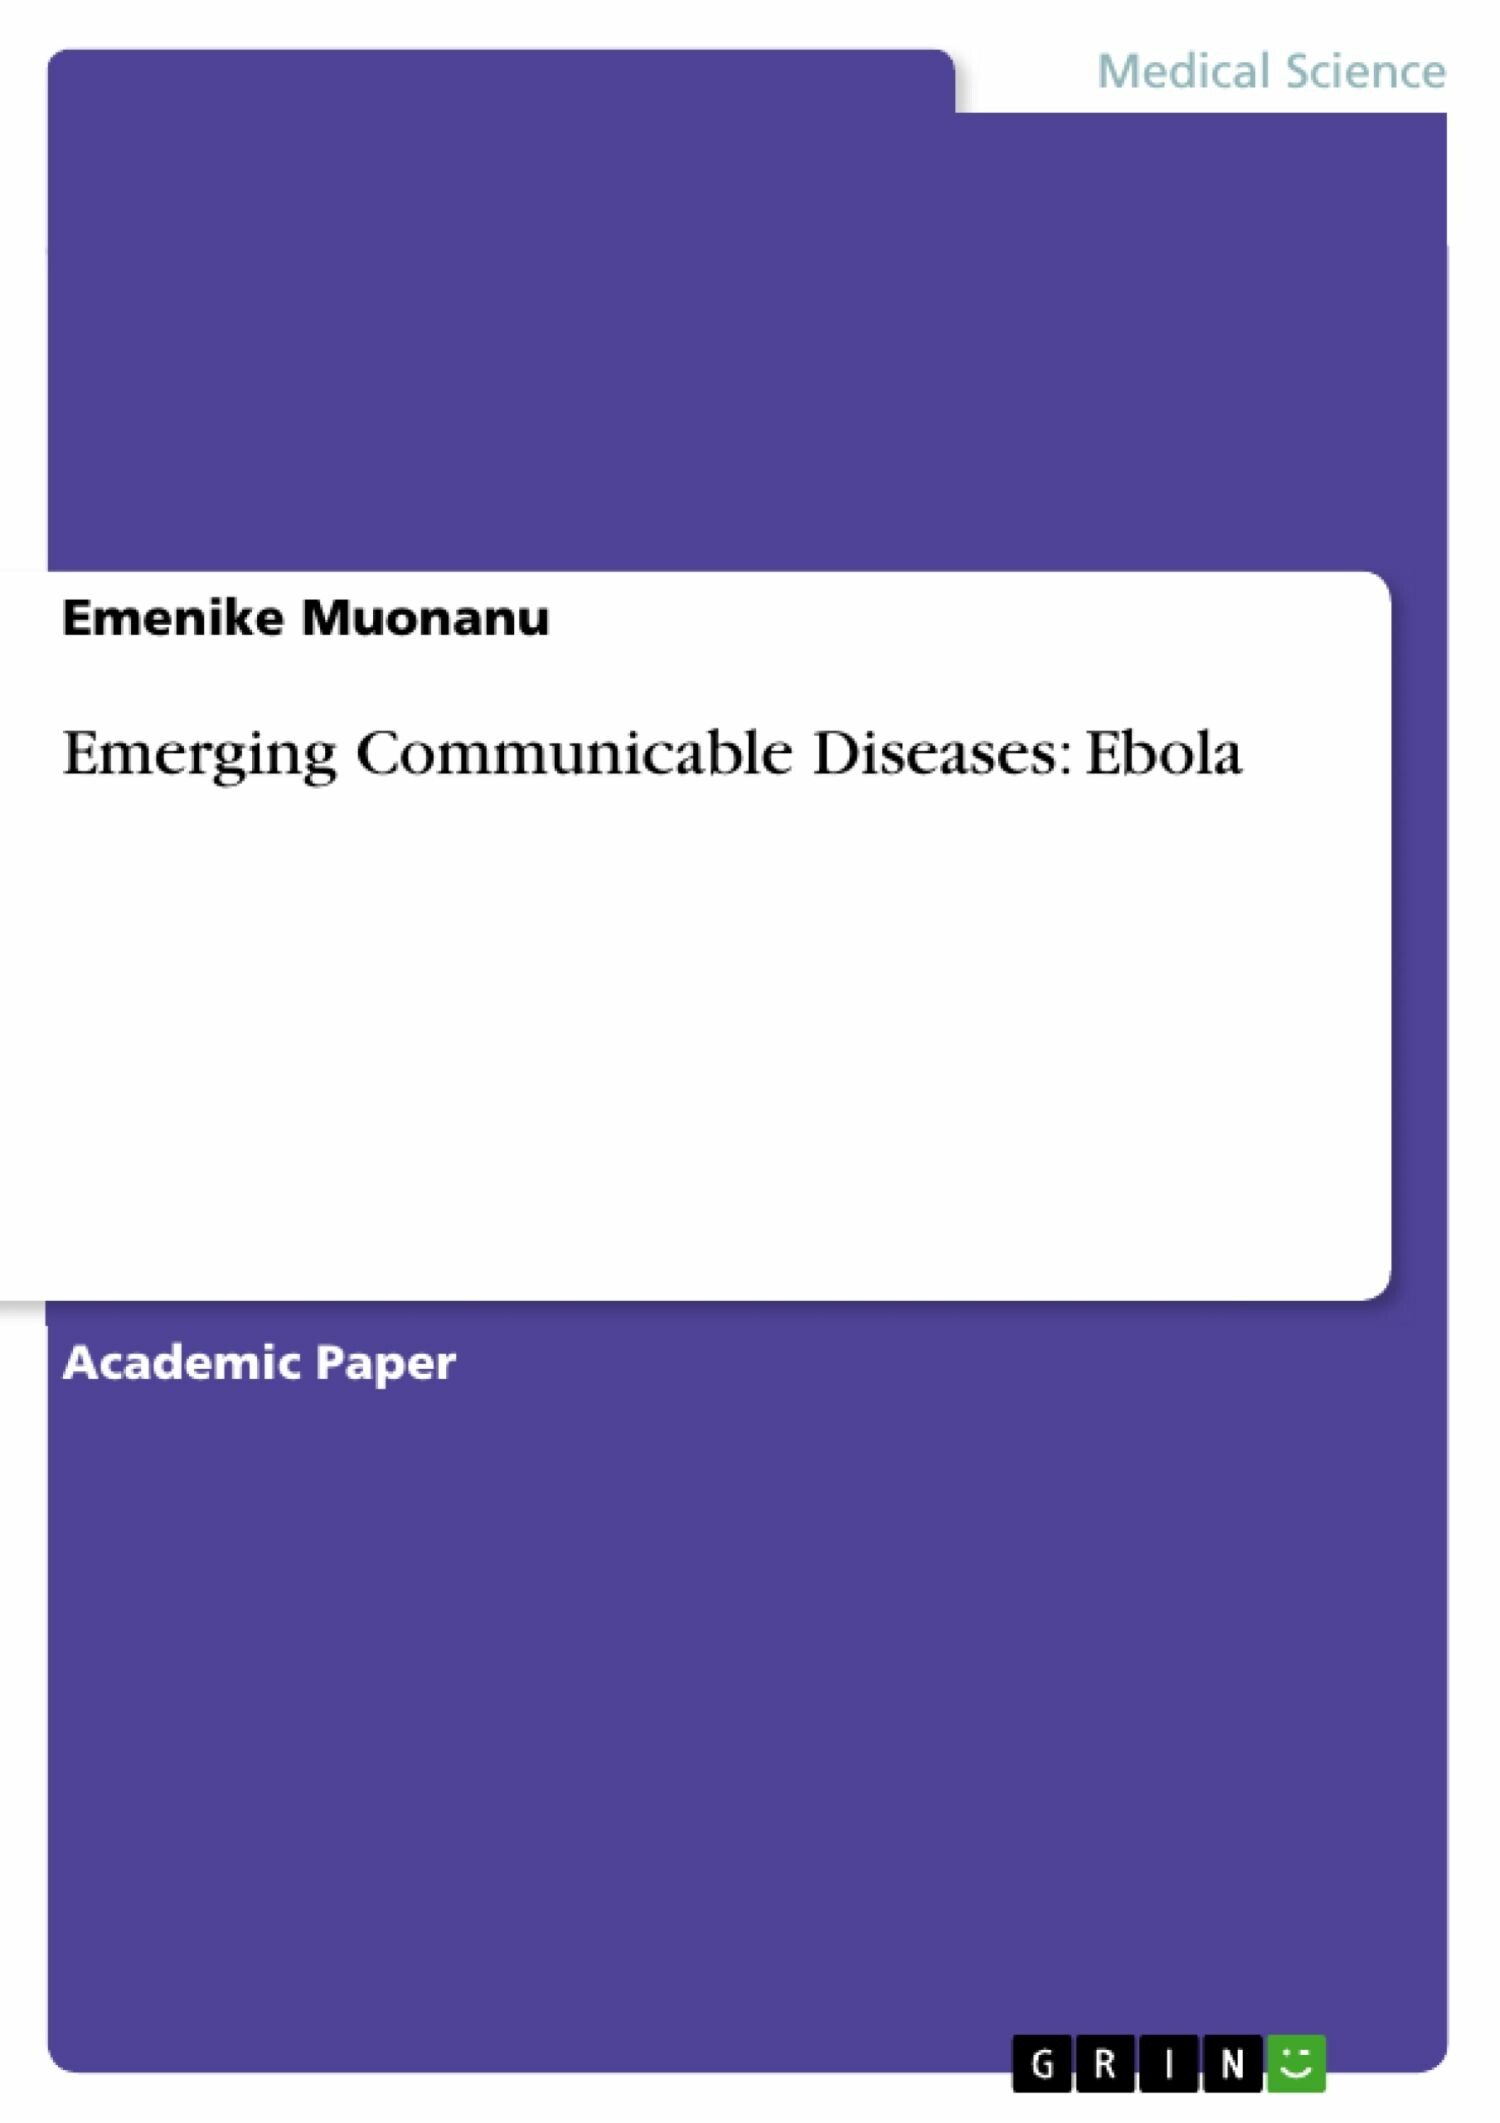 Emerging Communicable Diseases: Ebola